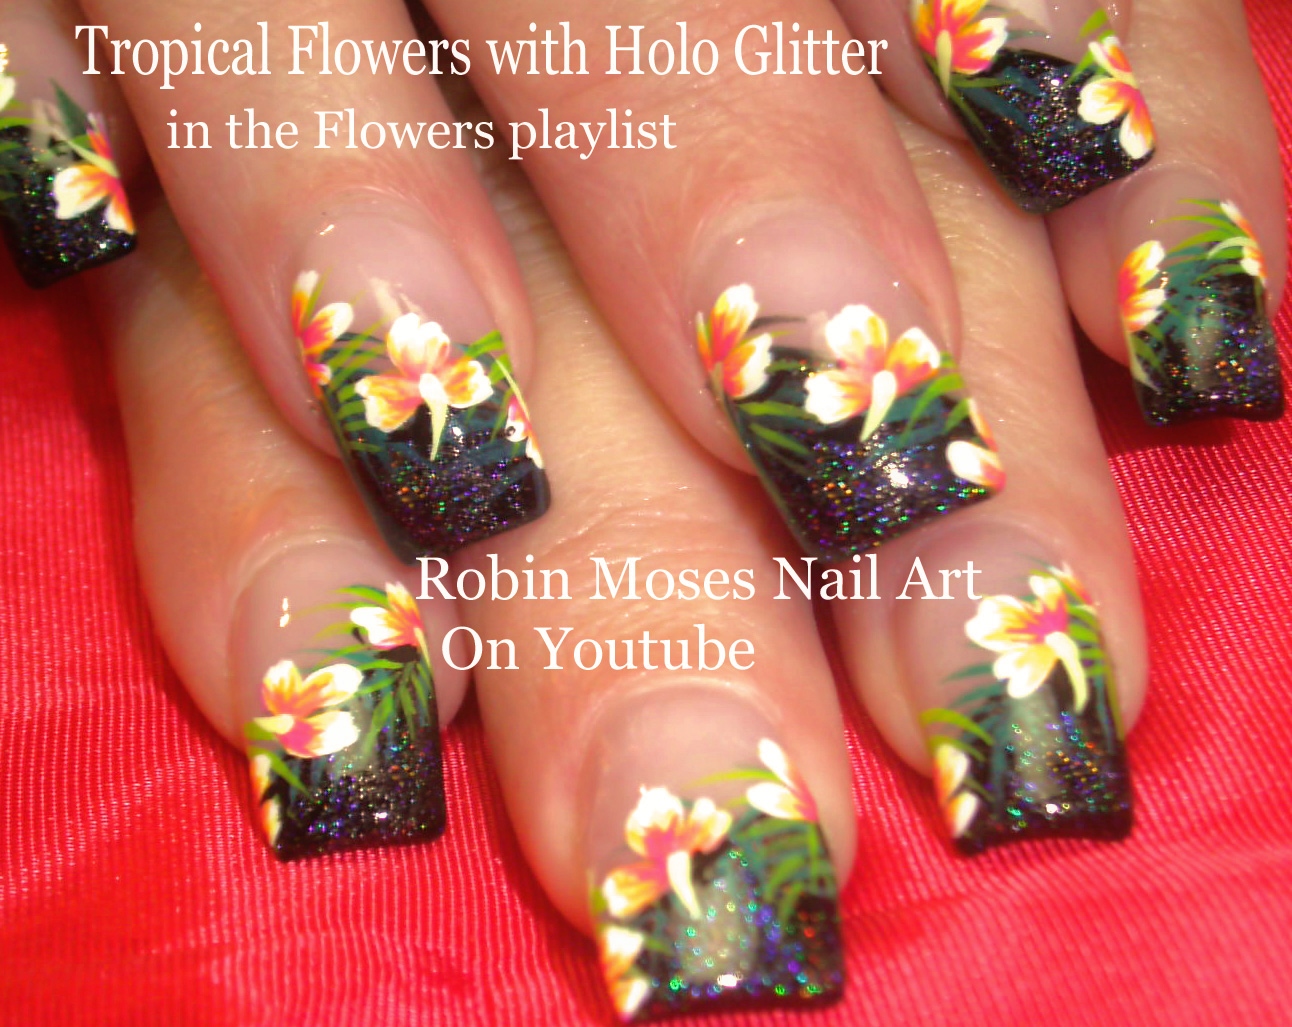 3. Neon tropical nail design with crystals - wide 10